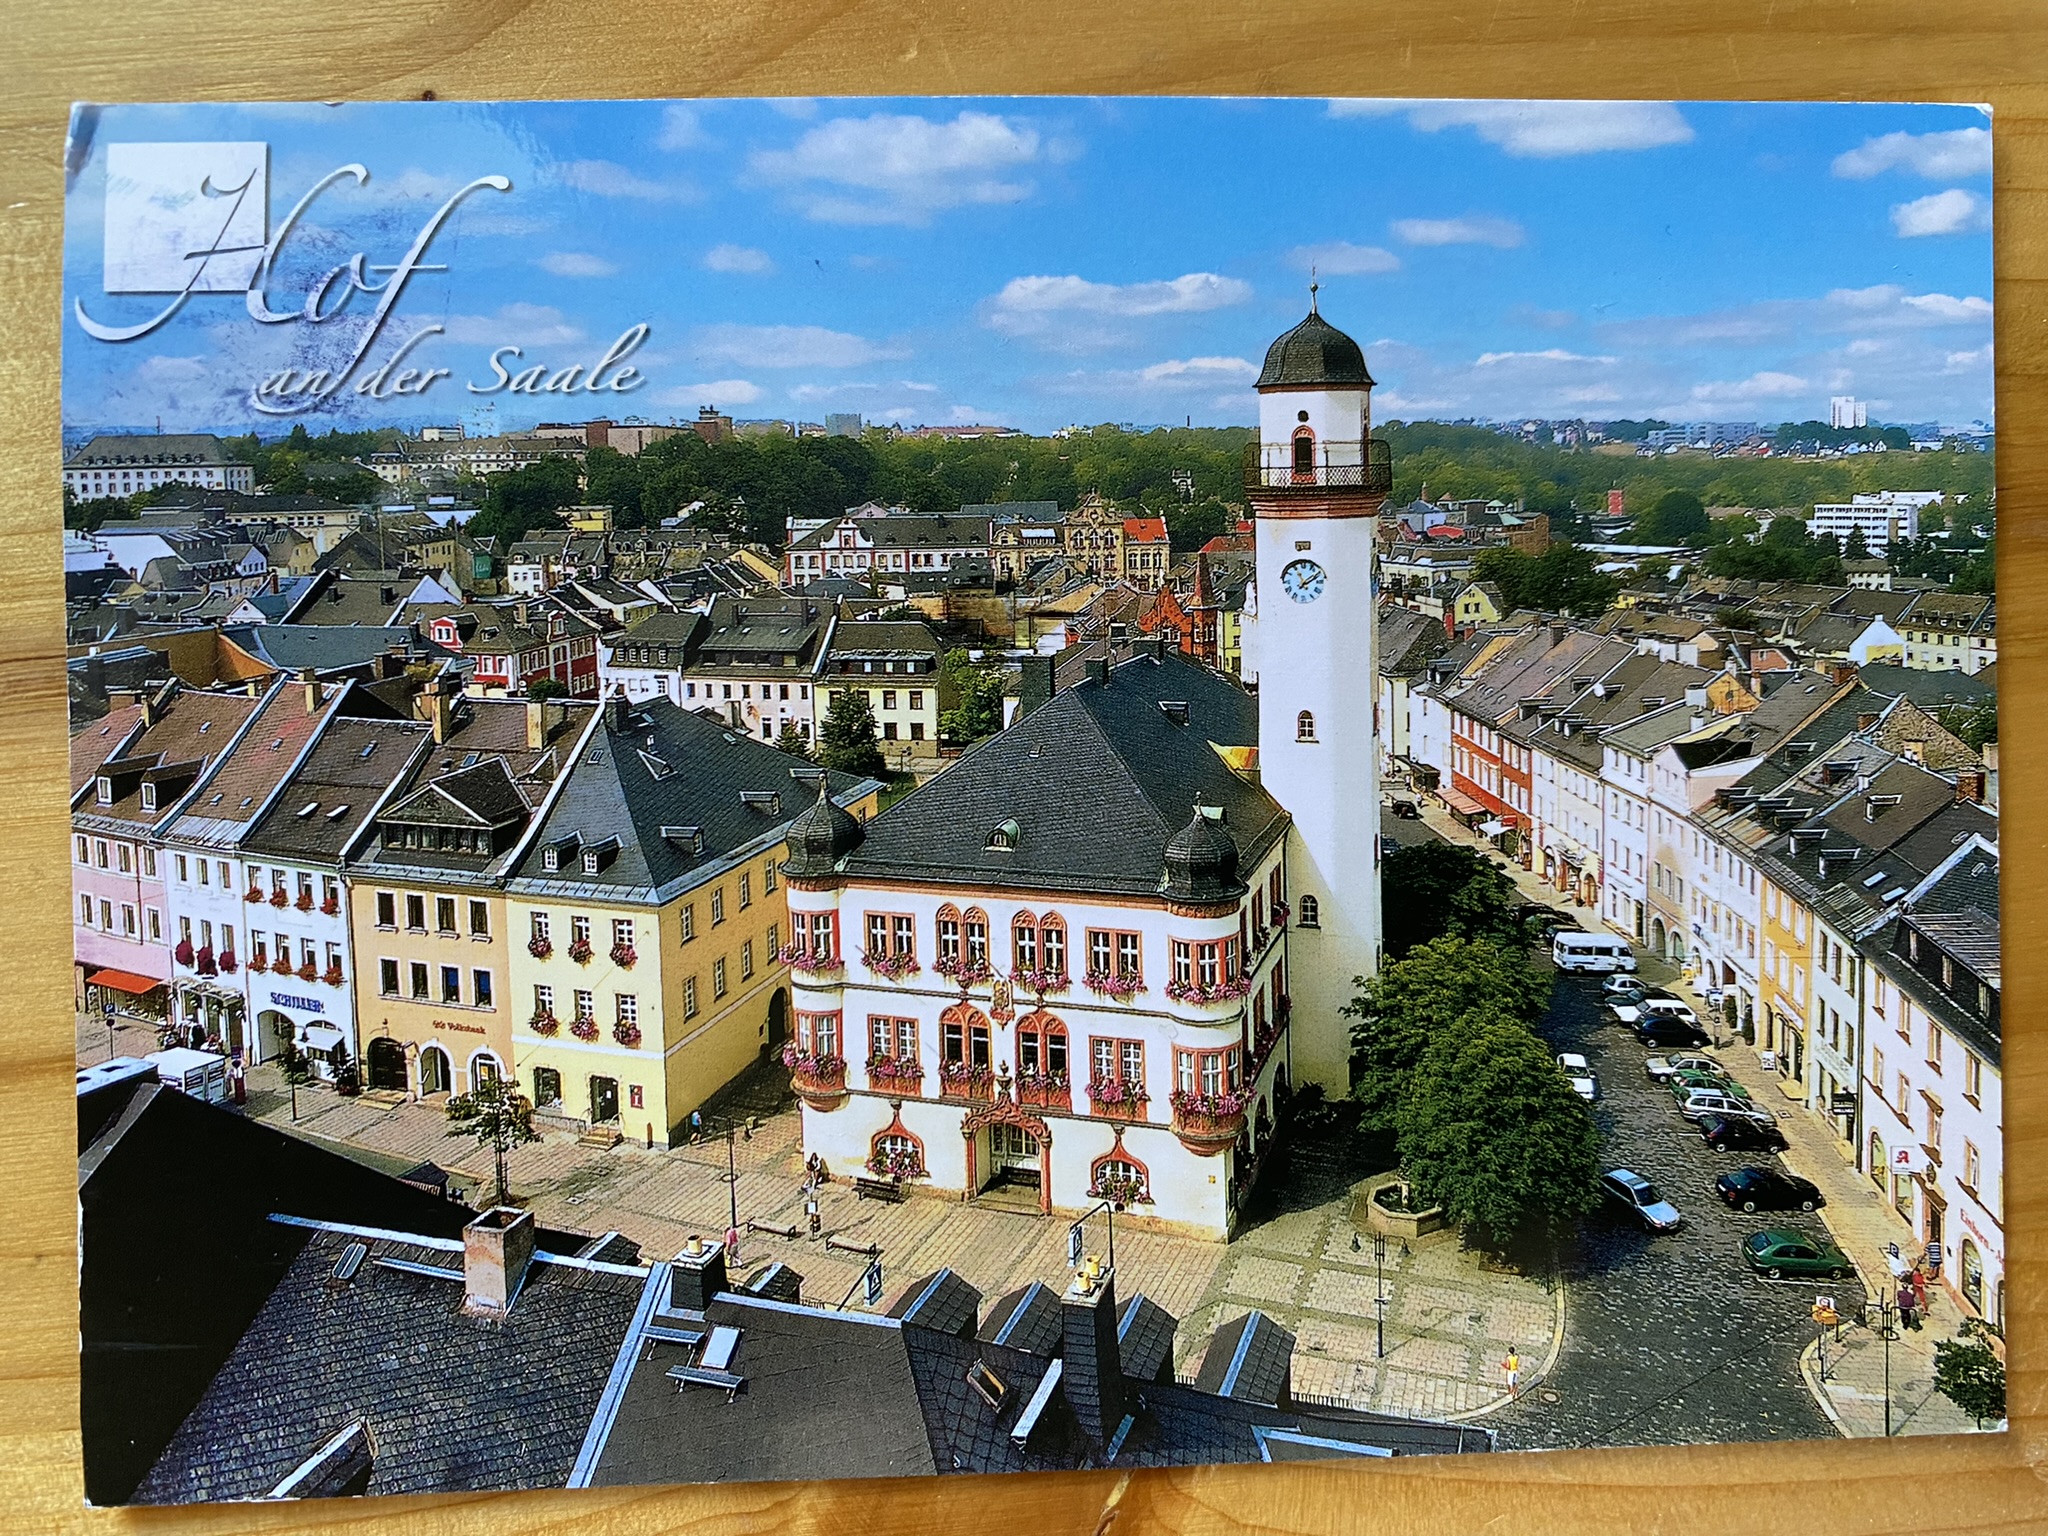 Postcard from Germany, received August 10 2022